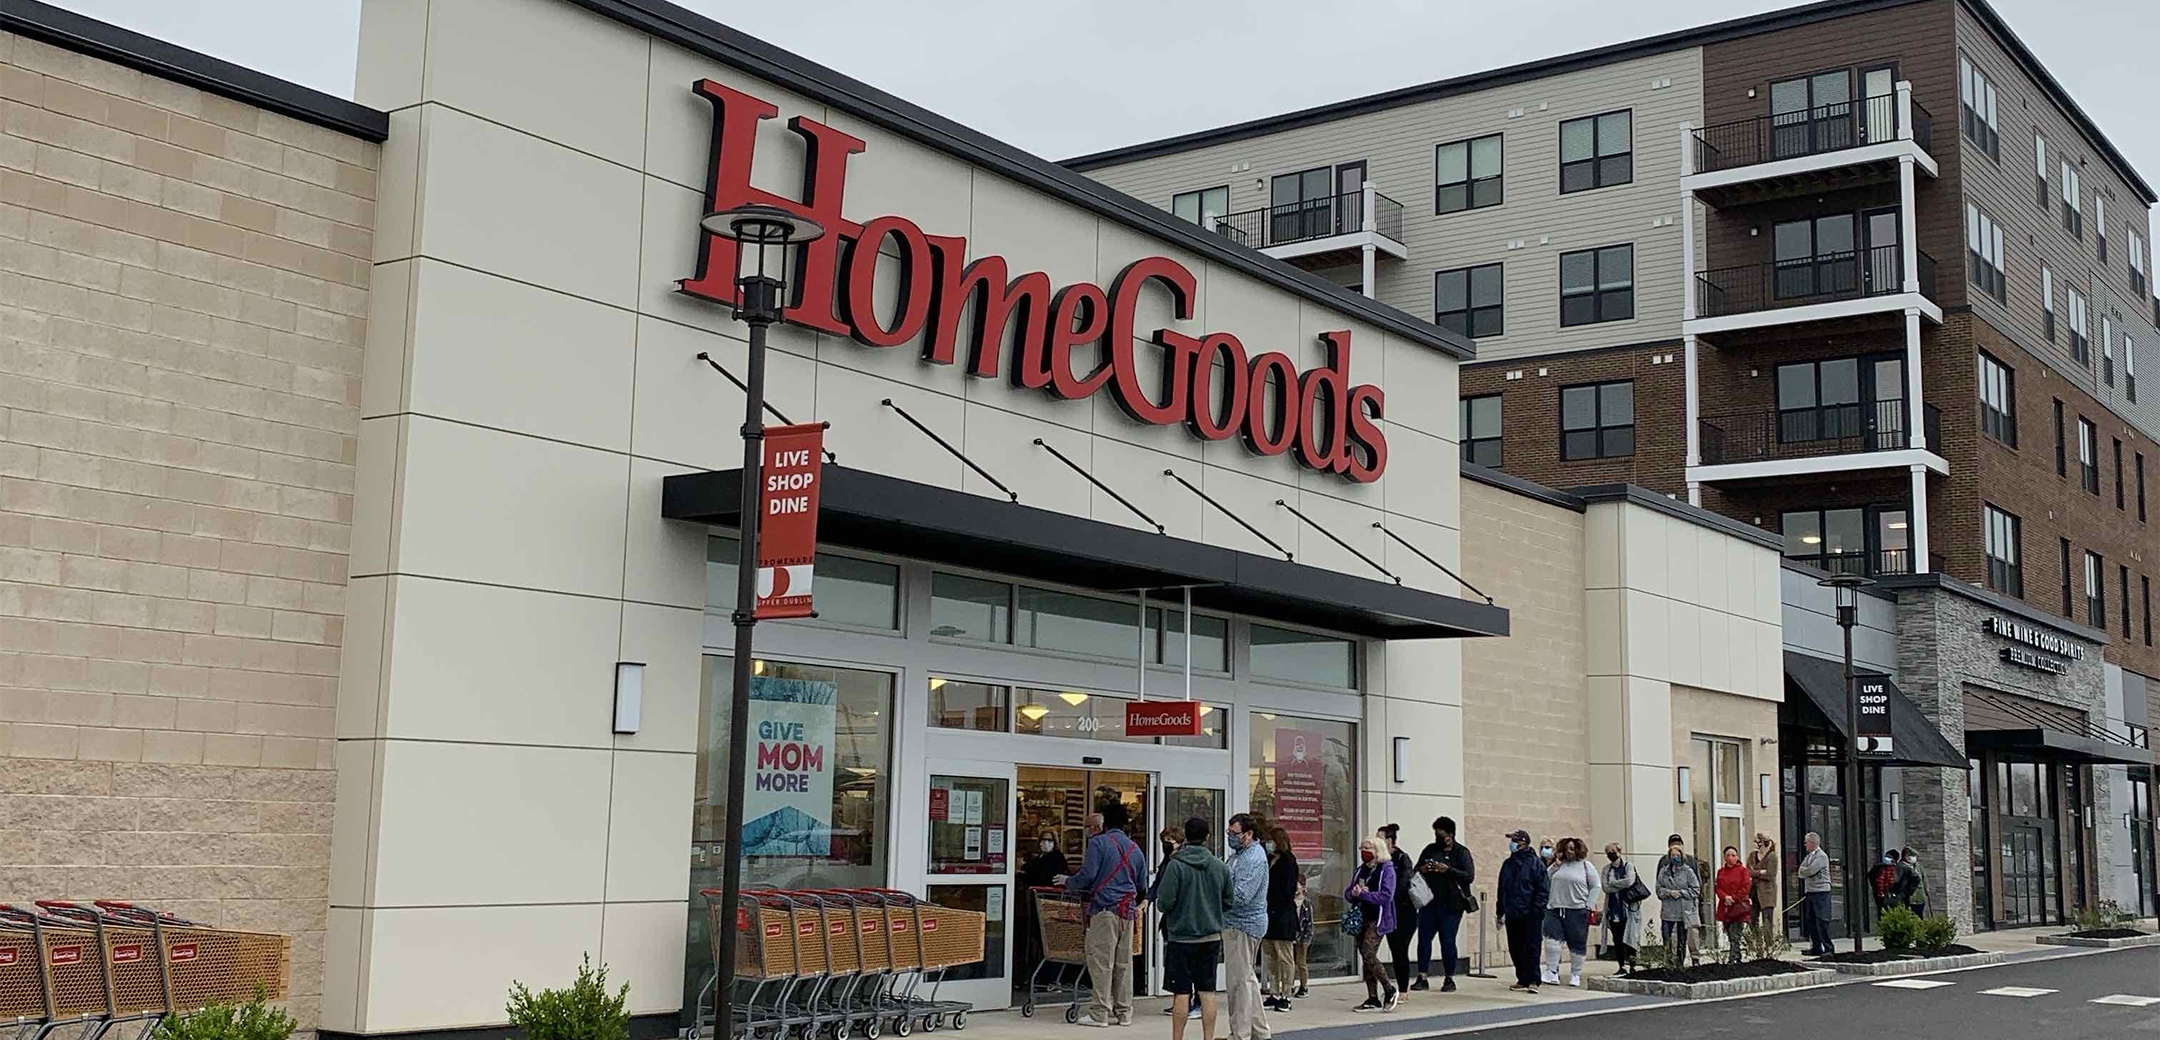 An angled exterior view of the Homegoods building showcasing the street it is on, people going through the front automatic doors and forming a line on the sidewalk.